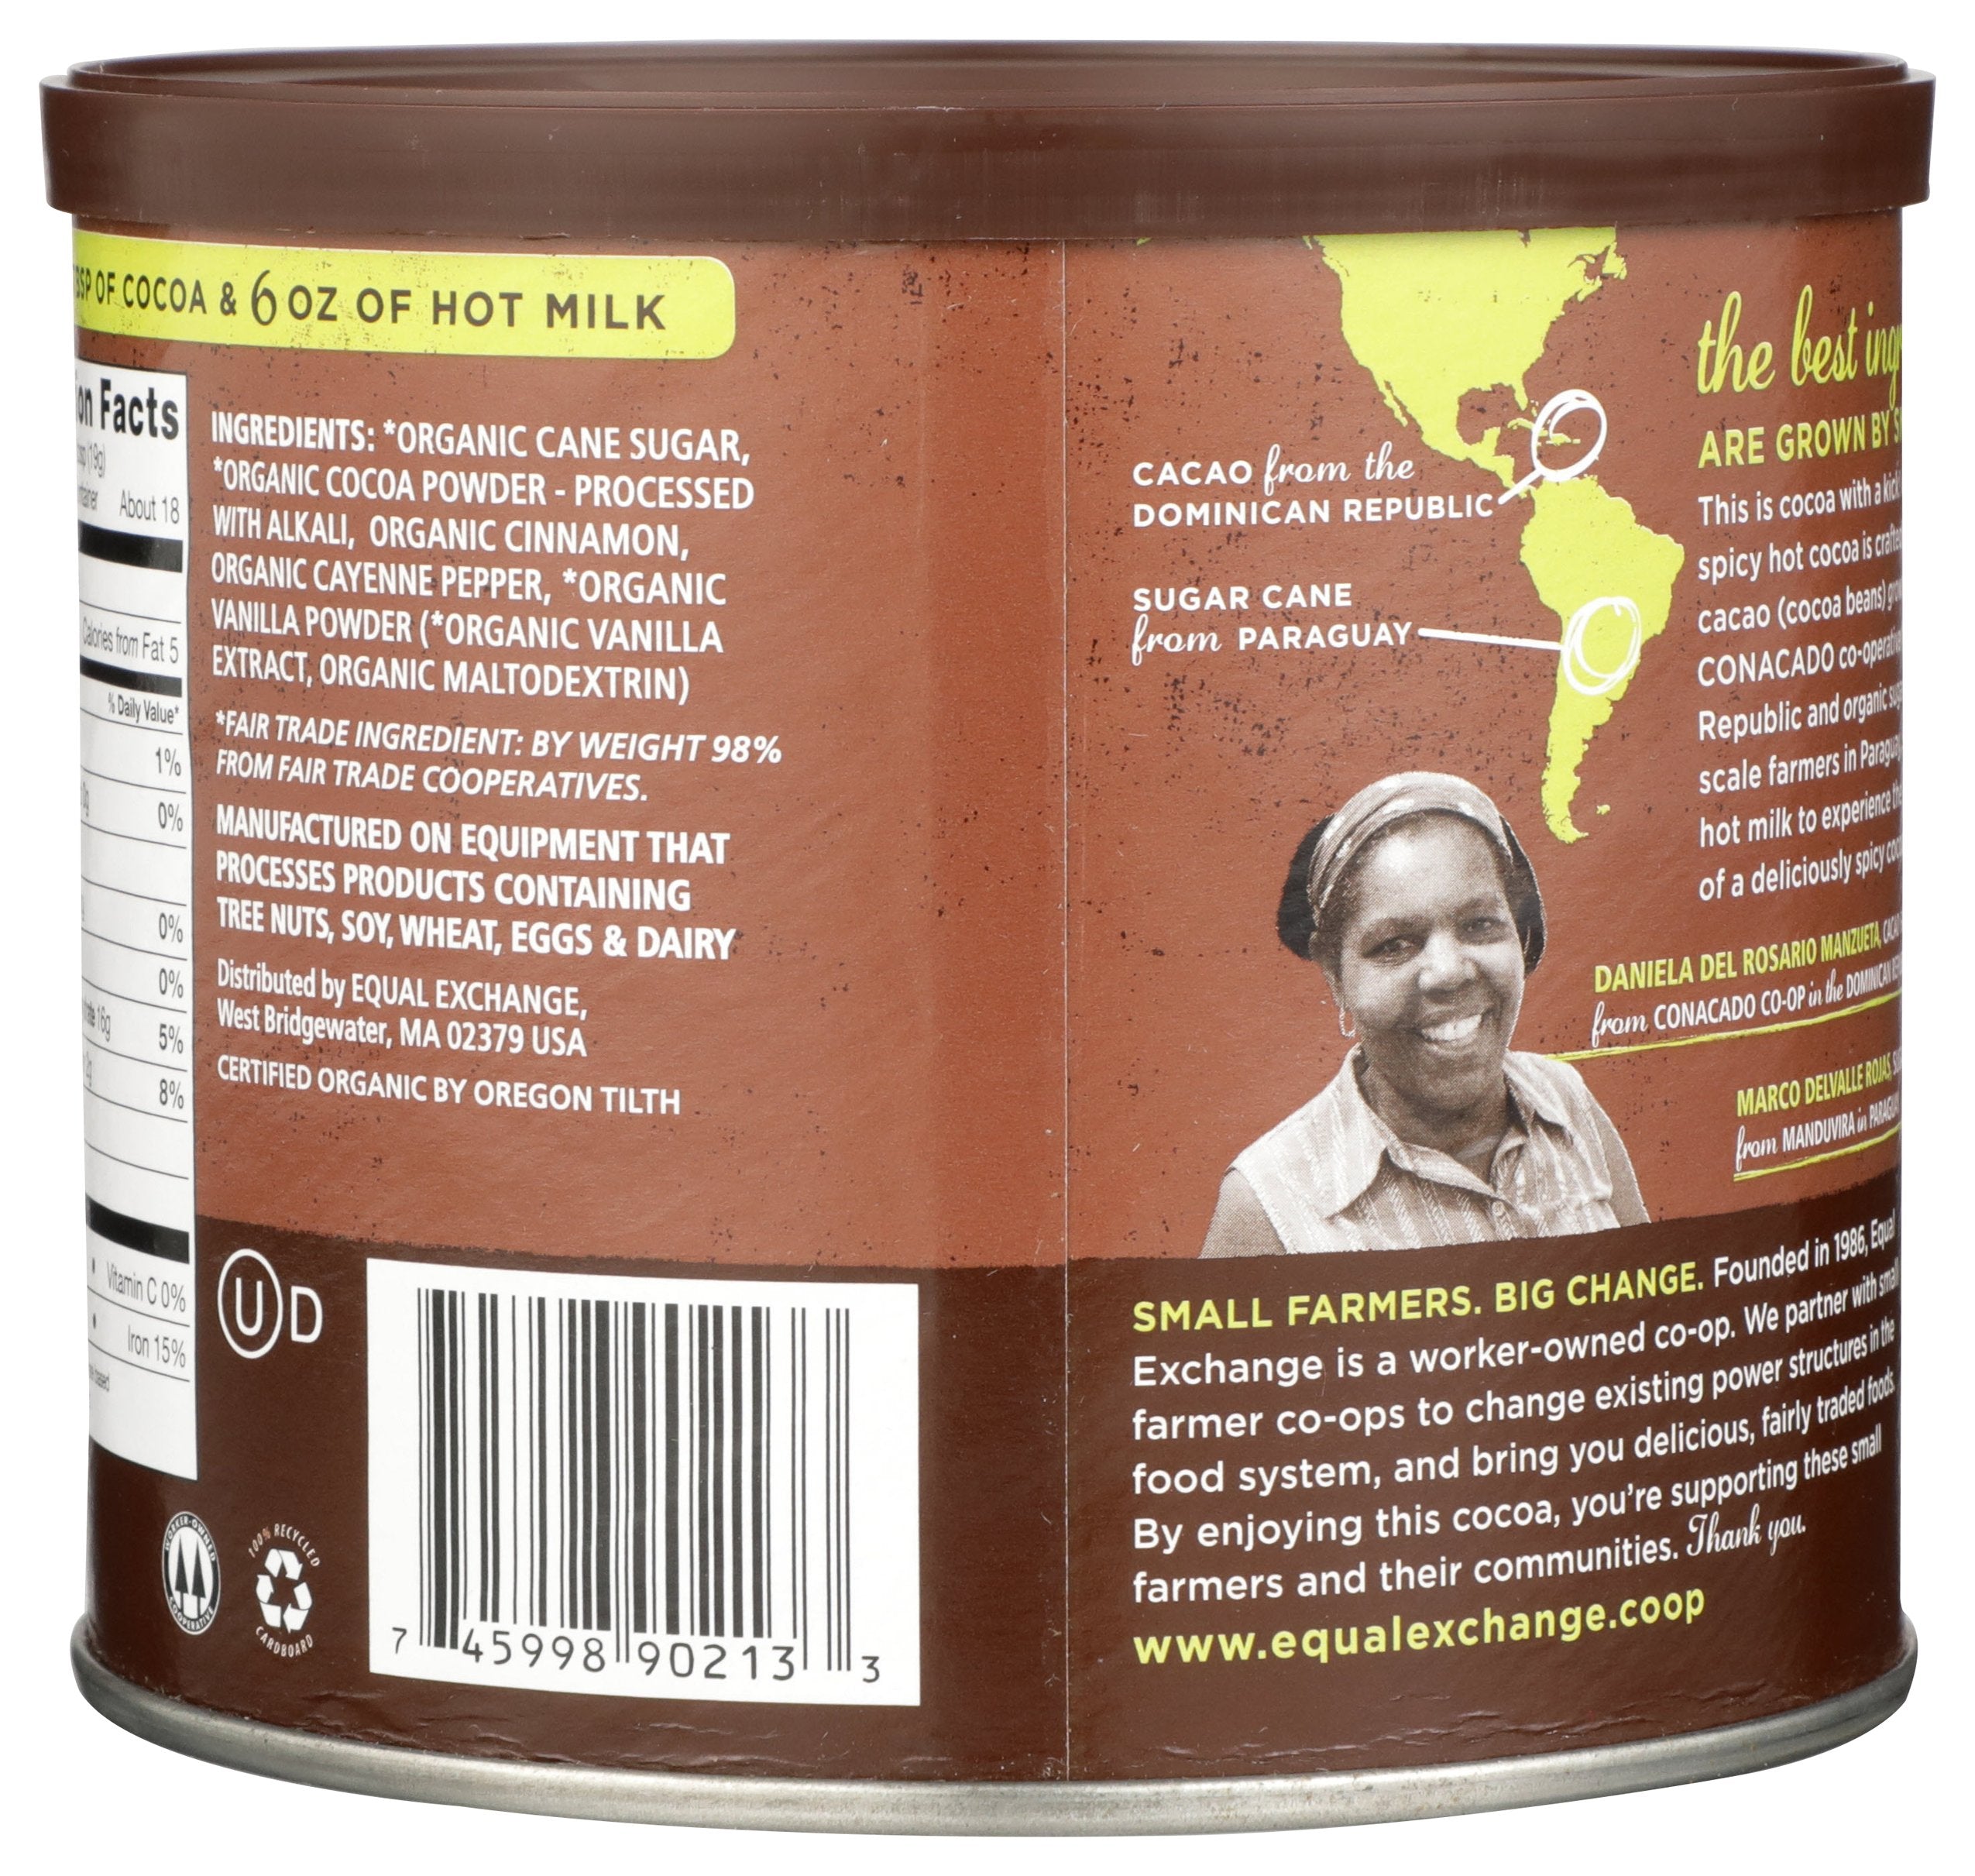 EQUAL EXCHANGE COCOA MIX HOT SPICY ORG - Case of 6